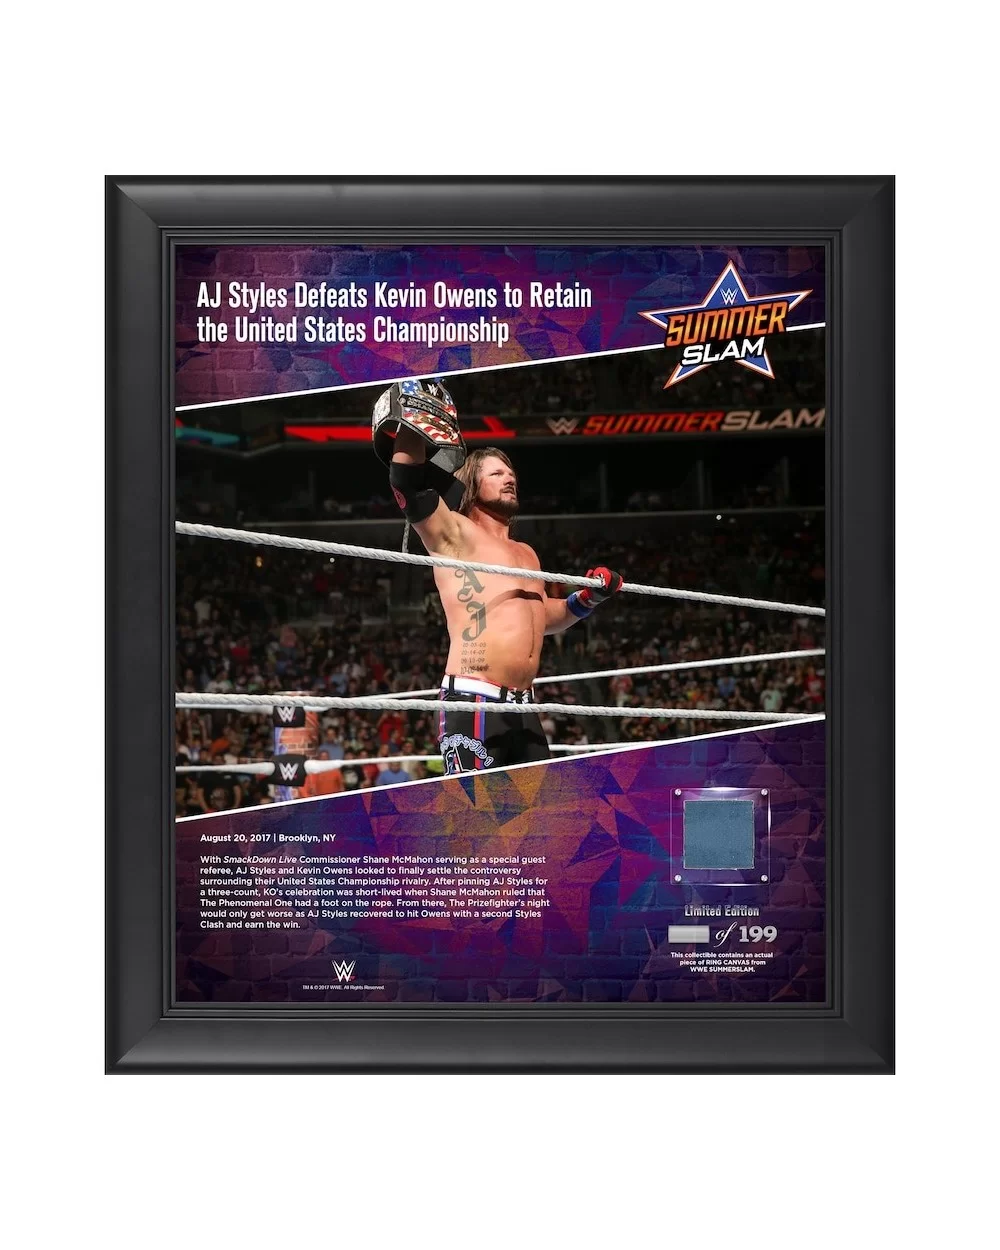 AJ Styles Framed 15" x 17" 2017 SummerSlam Collage with a Piece of Match-Used Canvas - Limited Edition of 199 $21.28 Collecti...